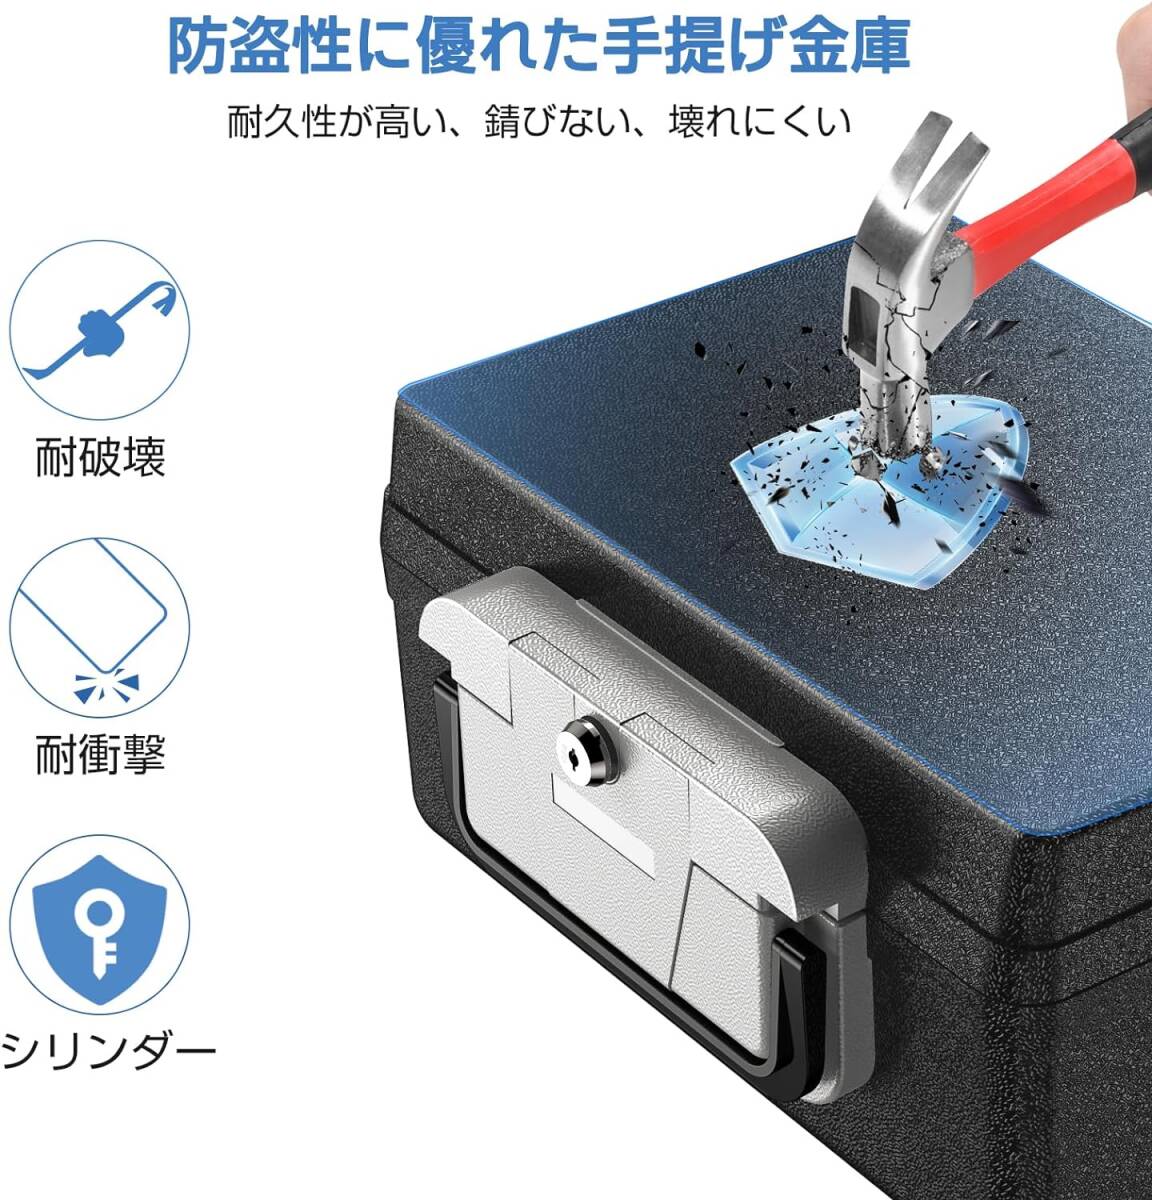 [ new arrival ] handbag safe water-proof fire-proof safe ETL standard key attaching A4 paper correspondence ground . fire measures portable safe compact carrying convenience Japanese owner manual attaching 